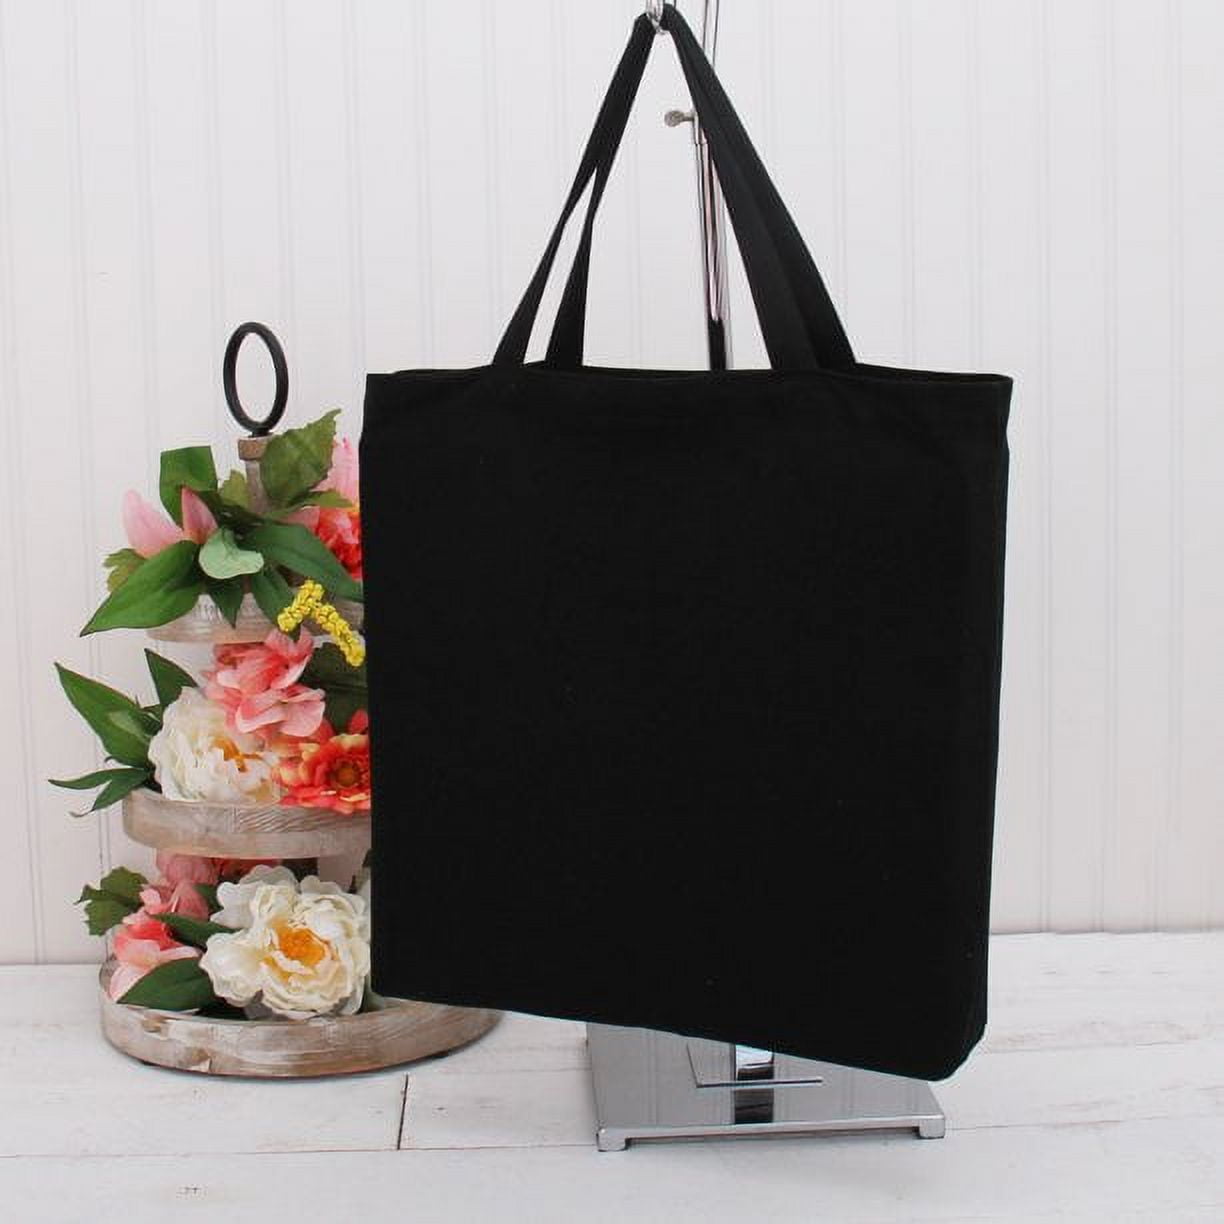 Black Loop Handle Personalized Canvas Tote Bag, Size/Dimension: 12 X 10 X 5  Inch